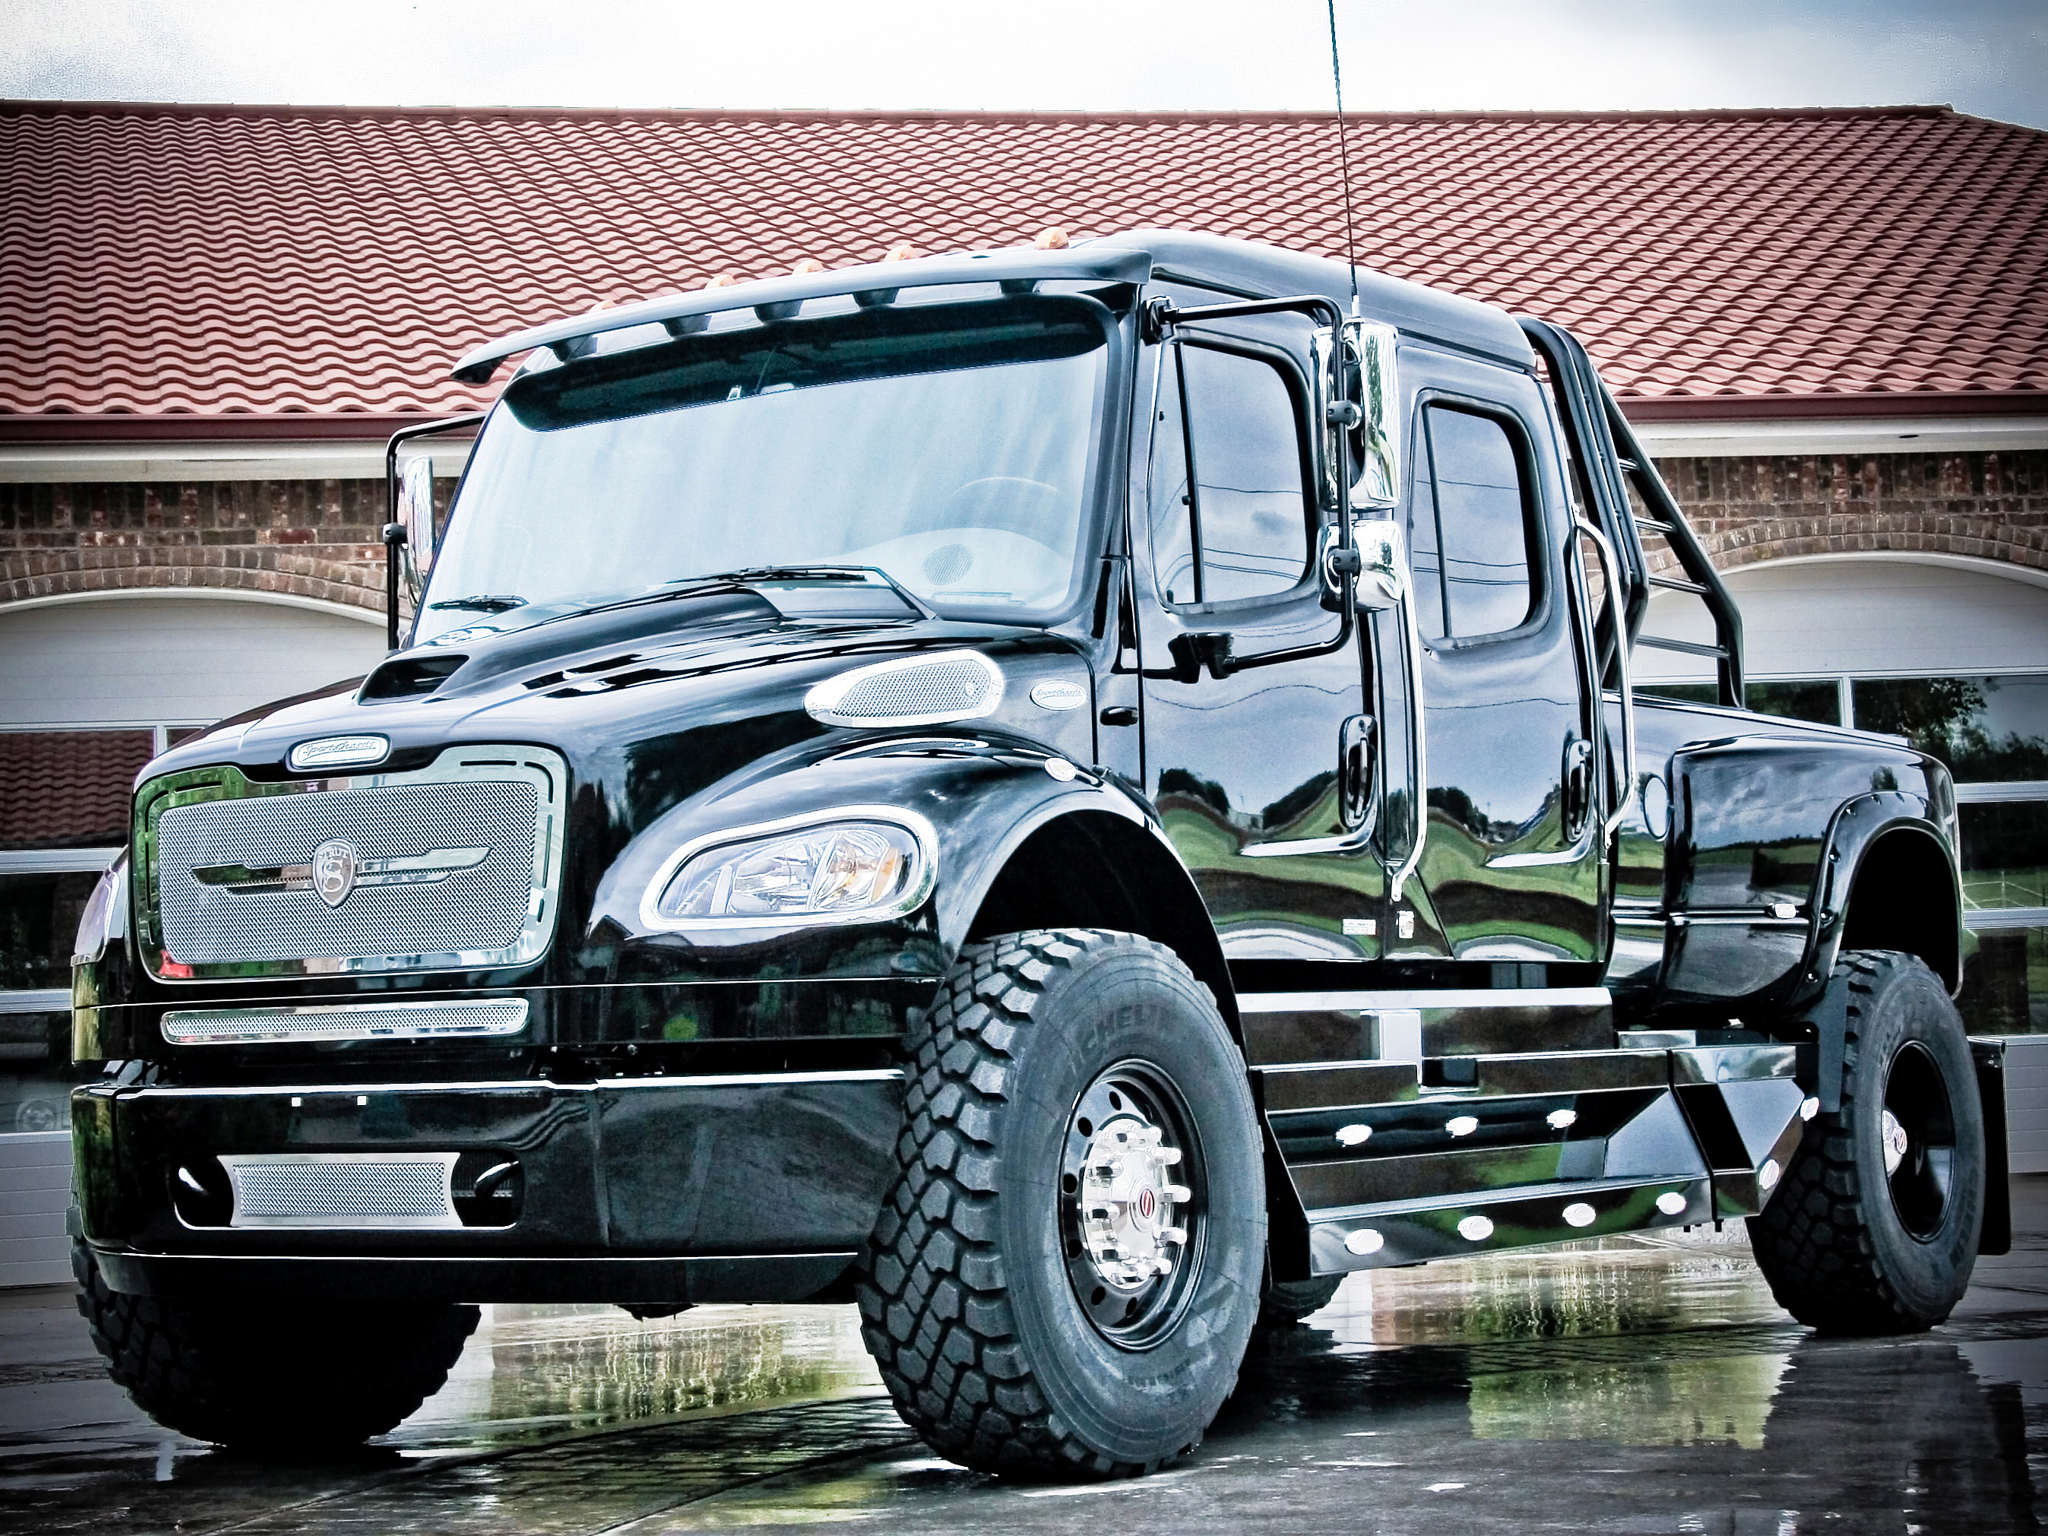 2004, Strut, Freightliner, Business, Class, M 2, Sportchassis, Grille, Semi, Tractor, 4x4 Wallpaper